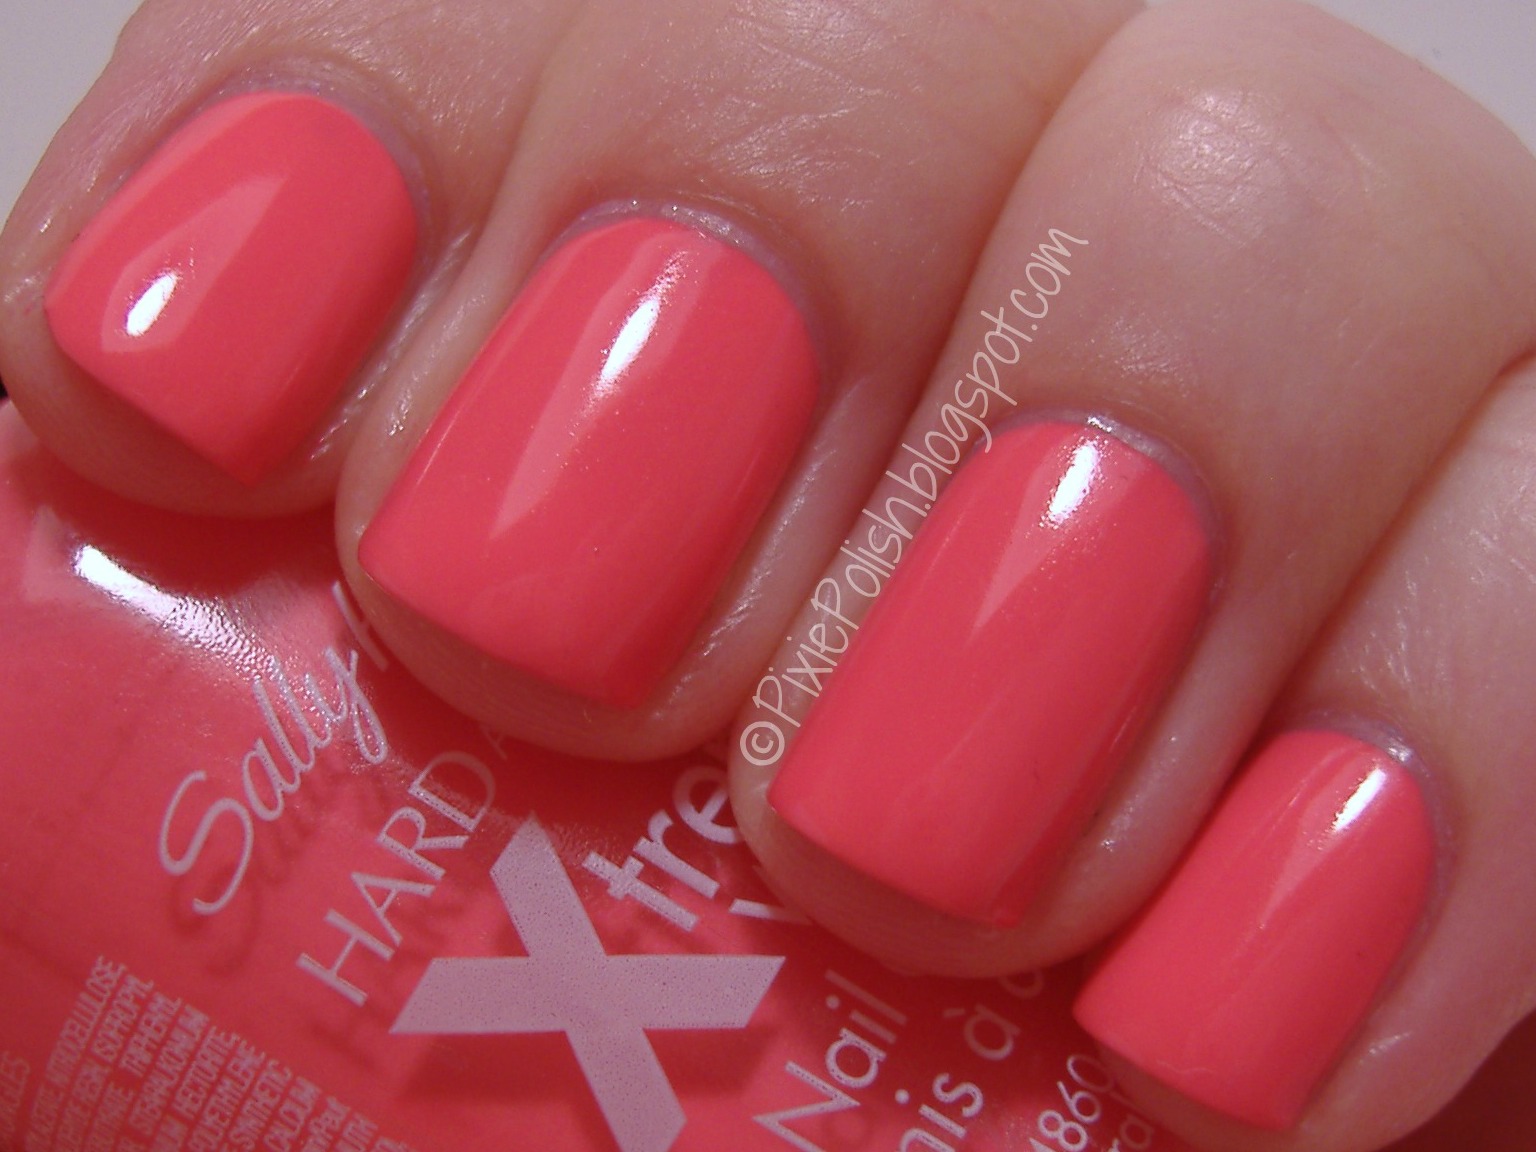 2. Essie Nail Polish in "Coral Reef" - wide 10